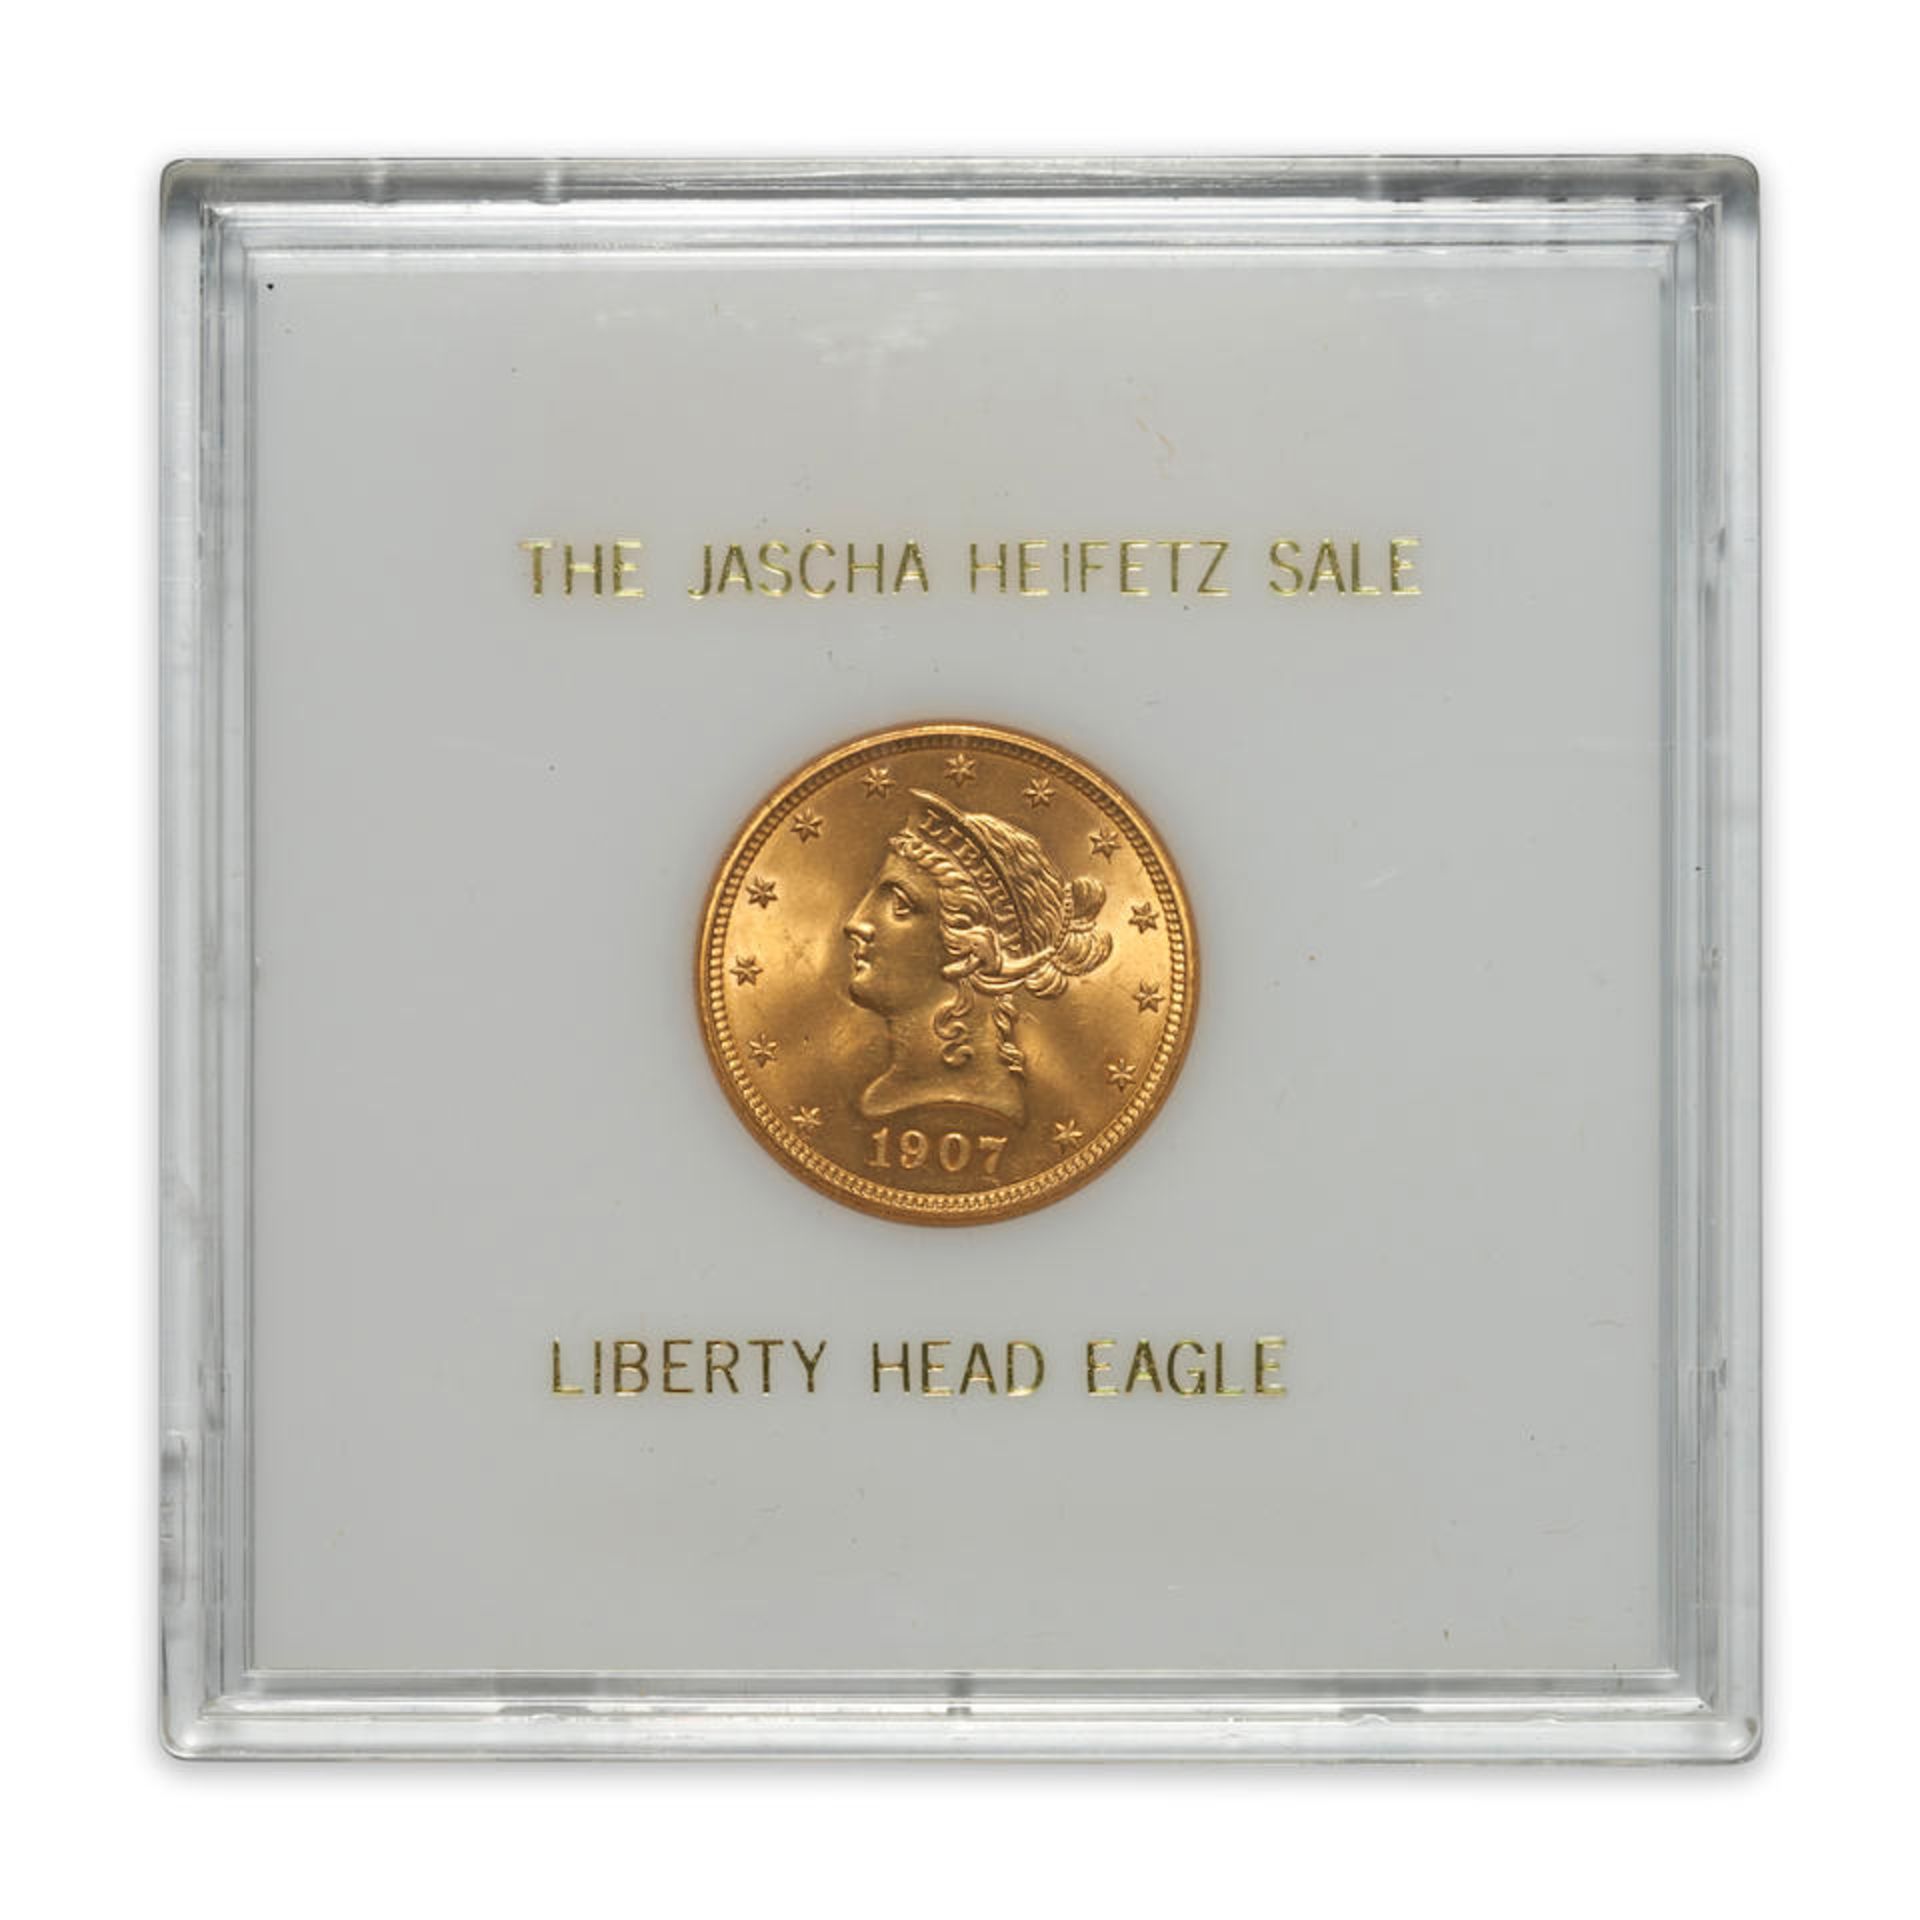 United States 1907 Liberty $10 Eagle Gold Coin.